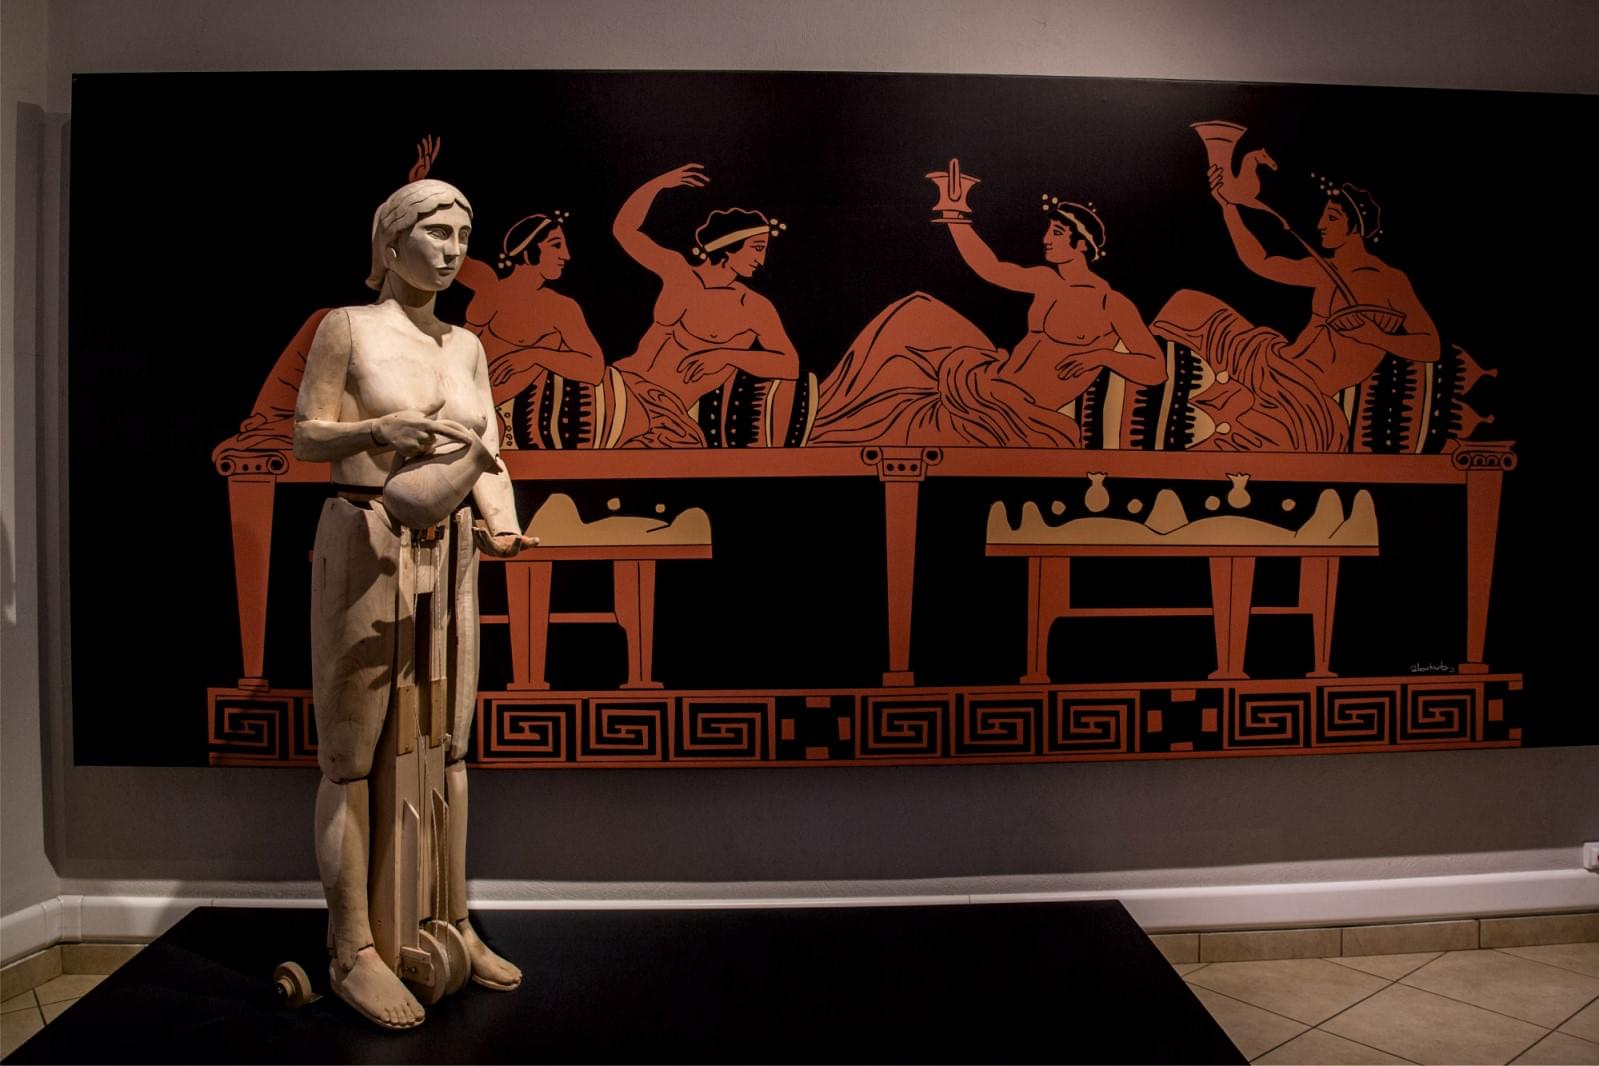 Explore the history and antique collection of Greeks